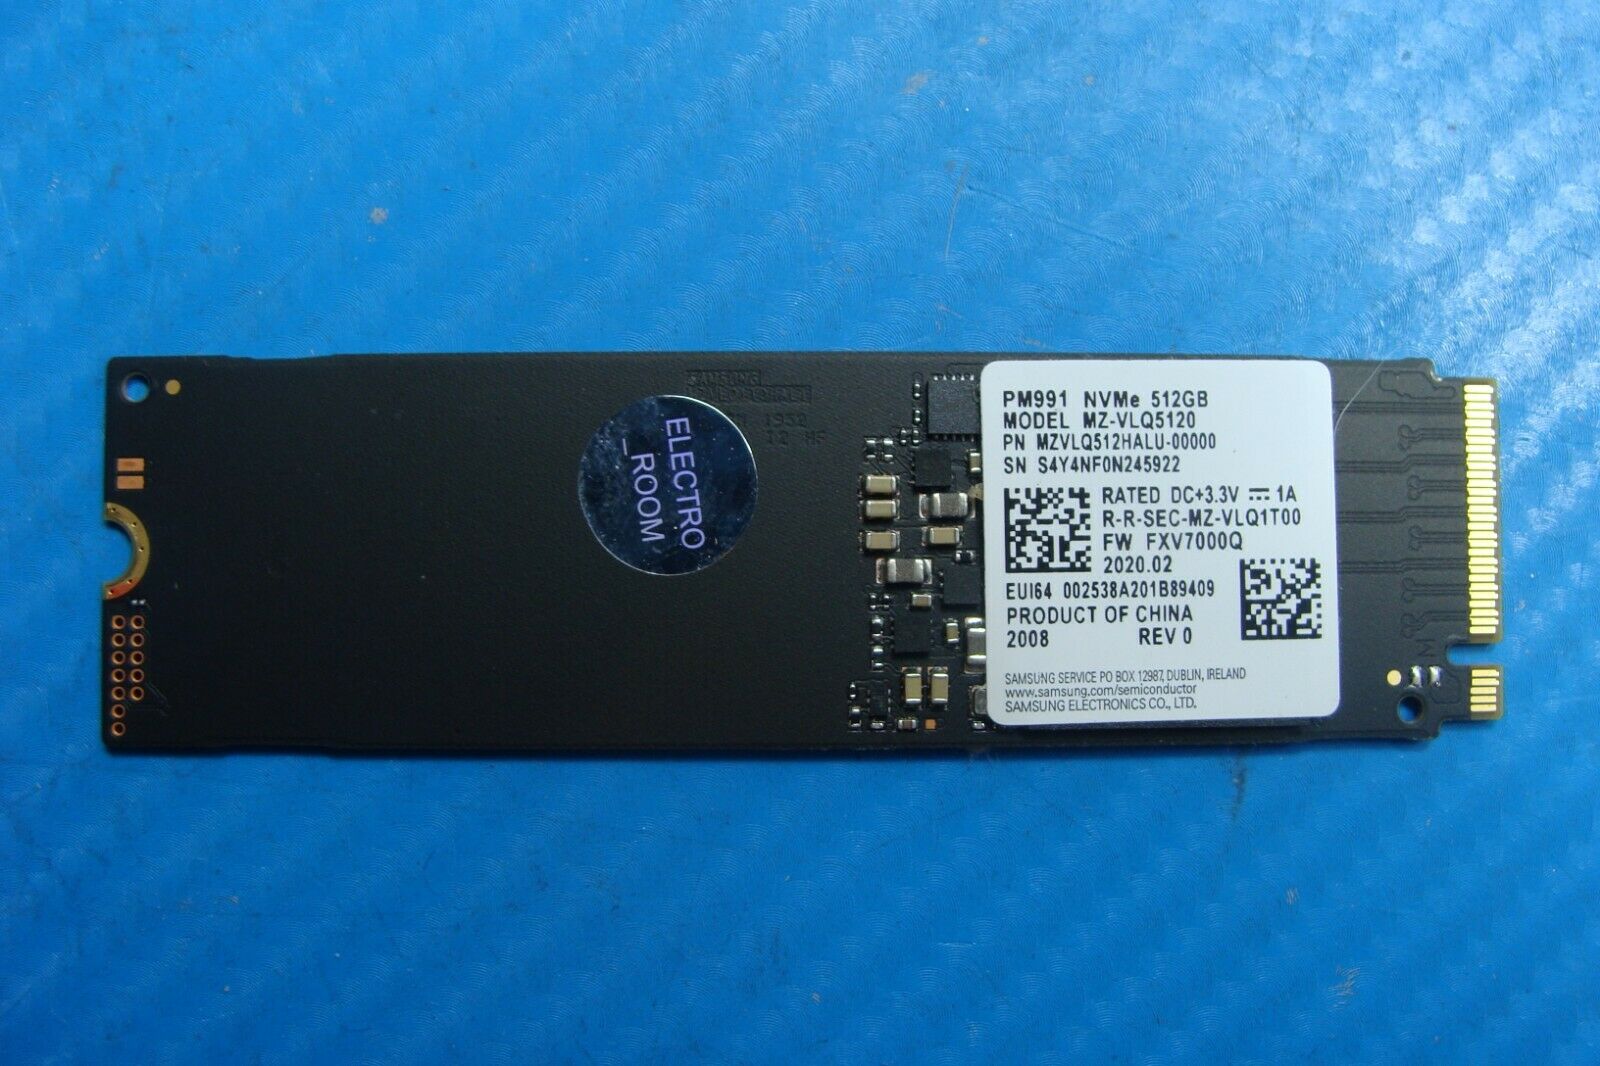 Acer SF314-42 Samsung PM991 512Gb NVMe M.2 Ssd Solid State Drive mz-vlq5120 